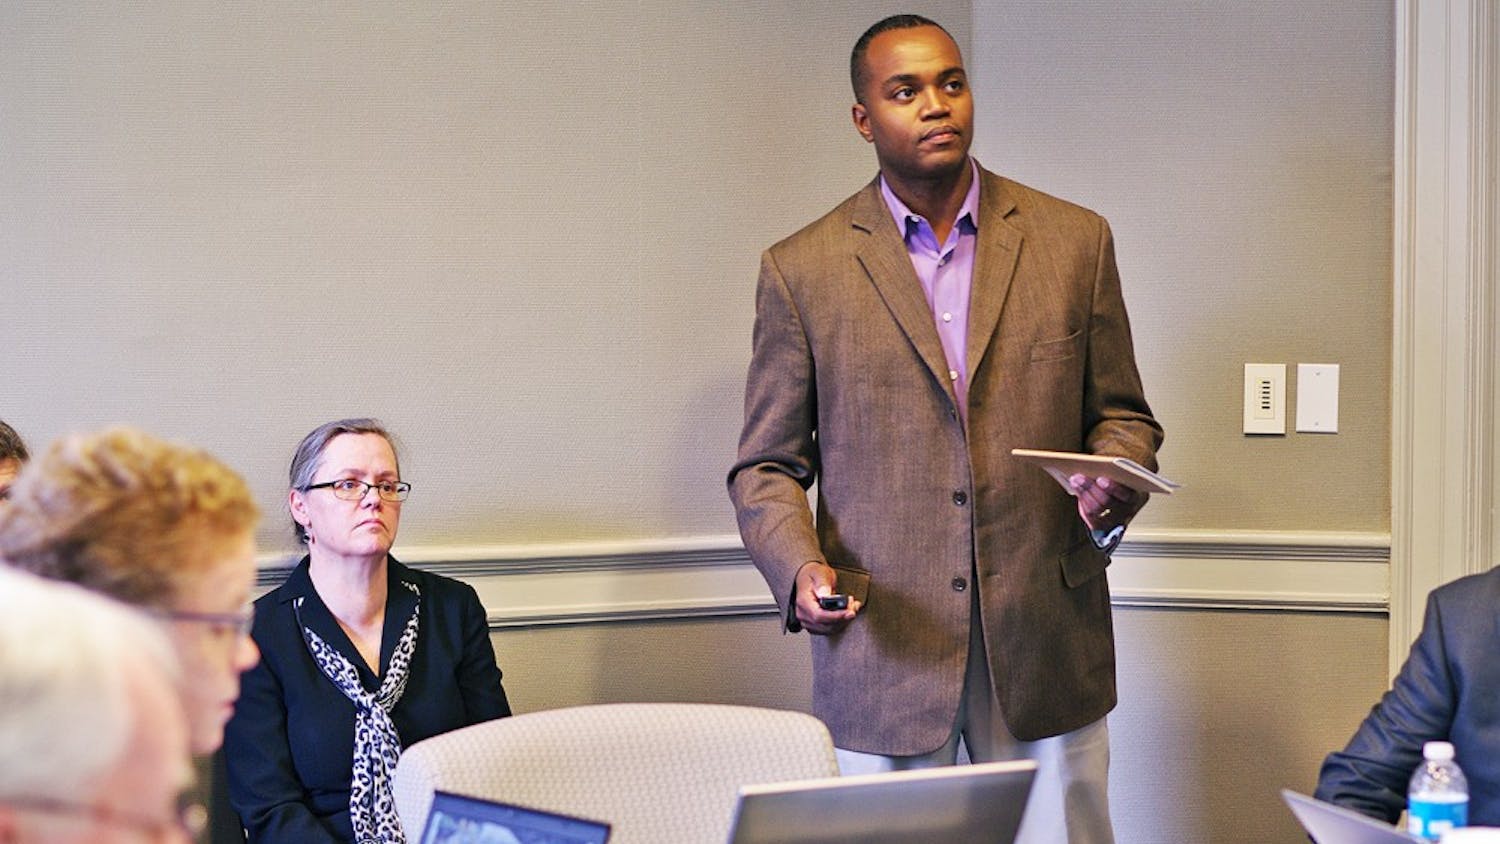 Associate Professor at North Carolina Central University Antonio Baines (right), speaks at the Faculty Executive meeting on Monday.